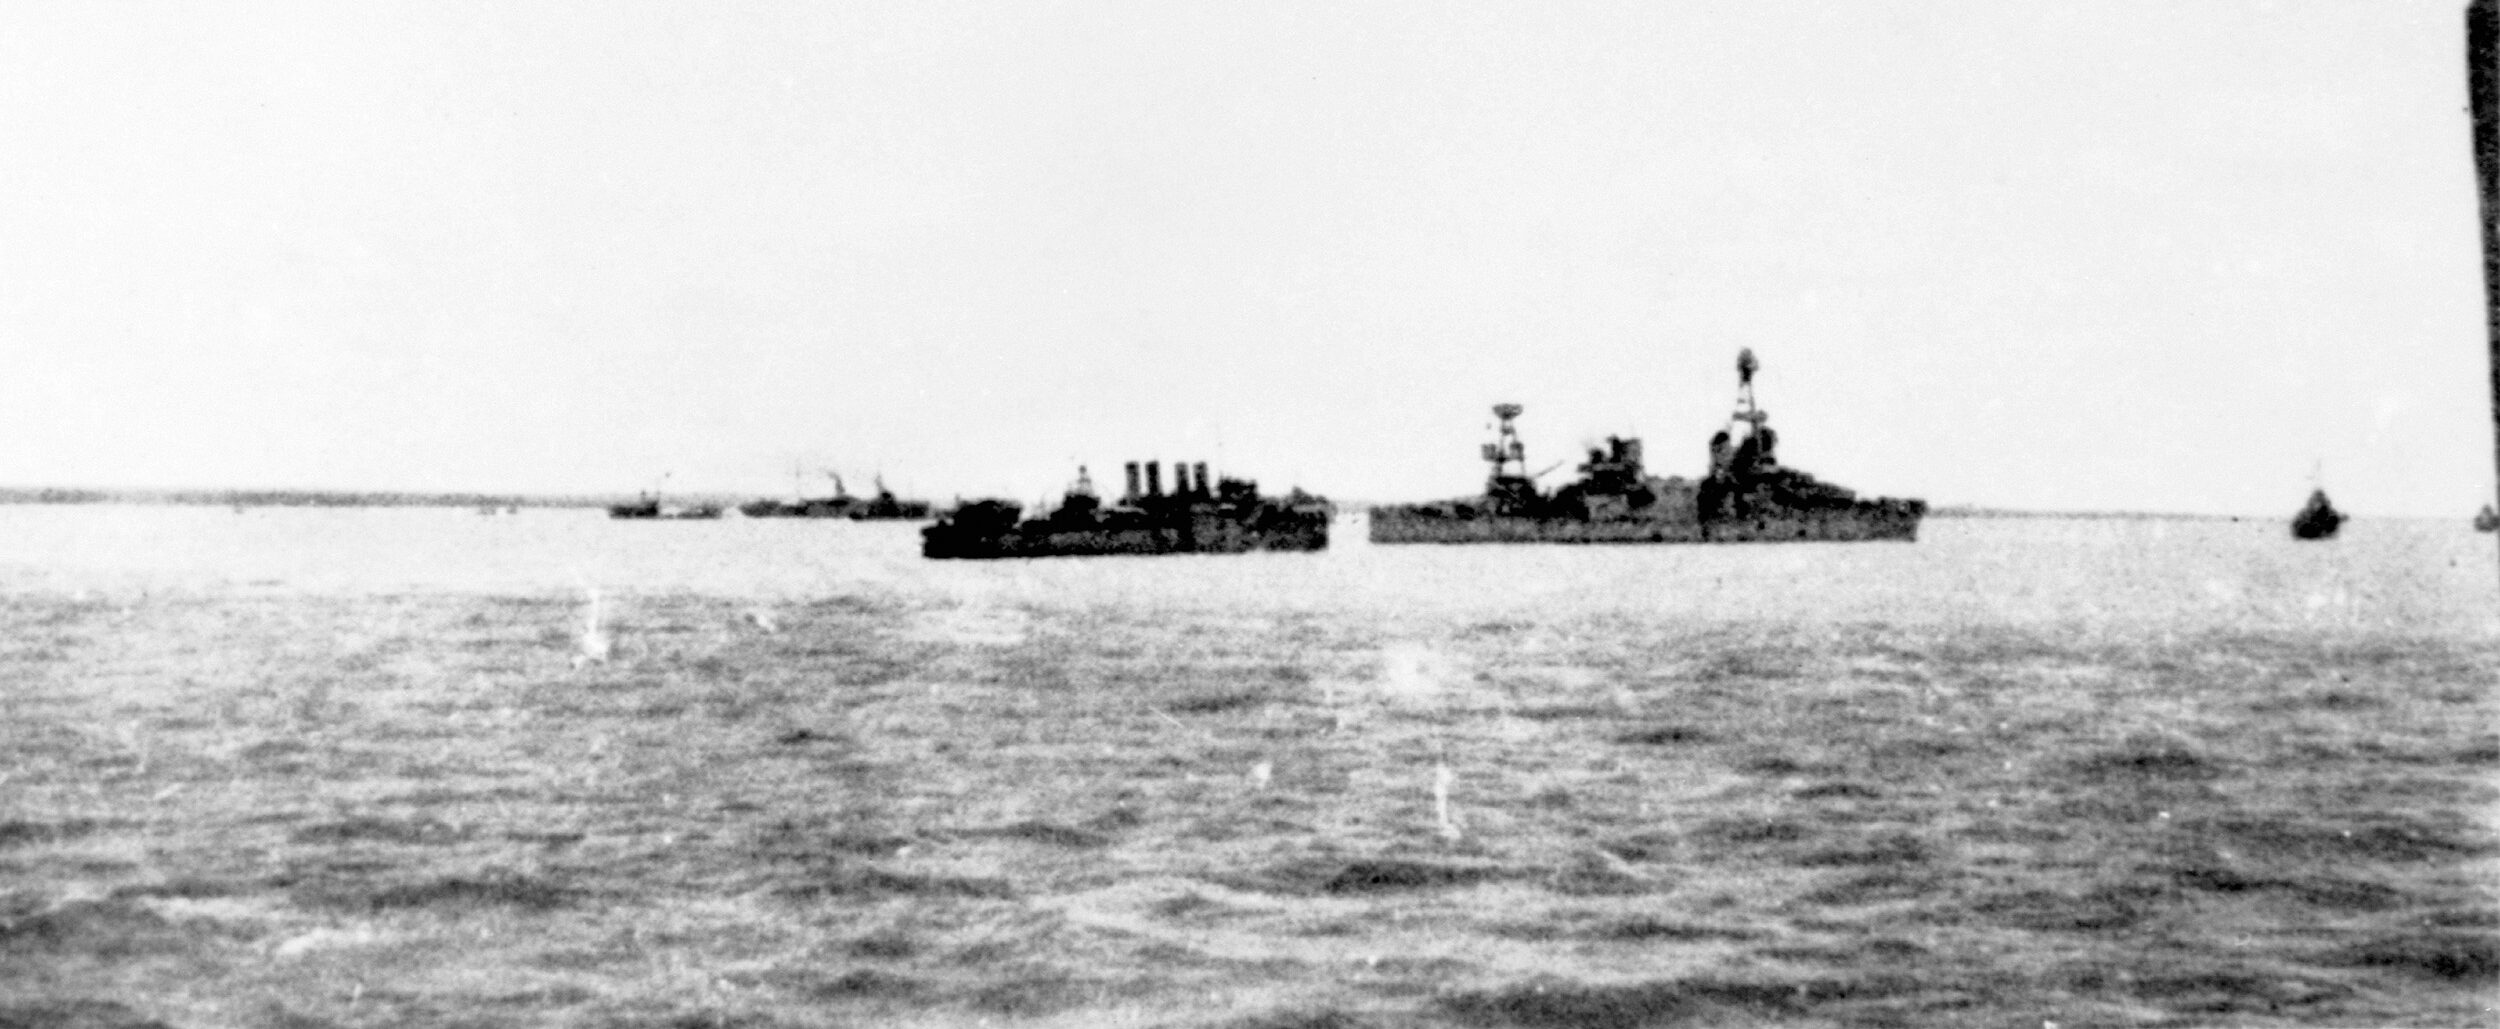 At anchor in the harbor of Darwin, Australia, the Australian cruiser Perth and the American cruiser Houston, both lost at the Battle of Sunda Strait, lie peacefully near the destroyers USS Preston and HMAS Platypus.